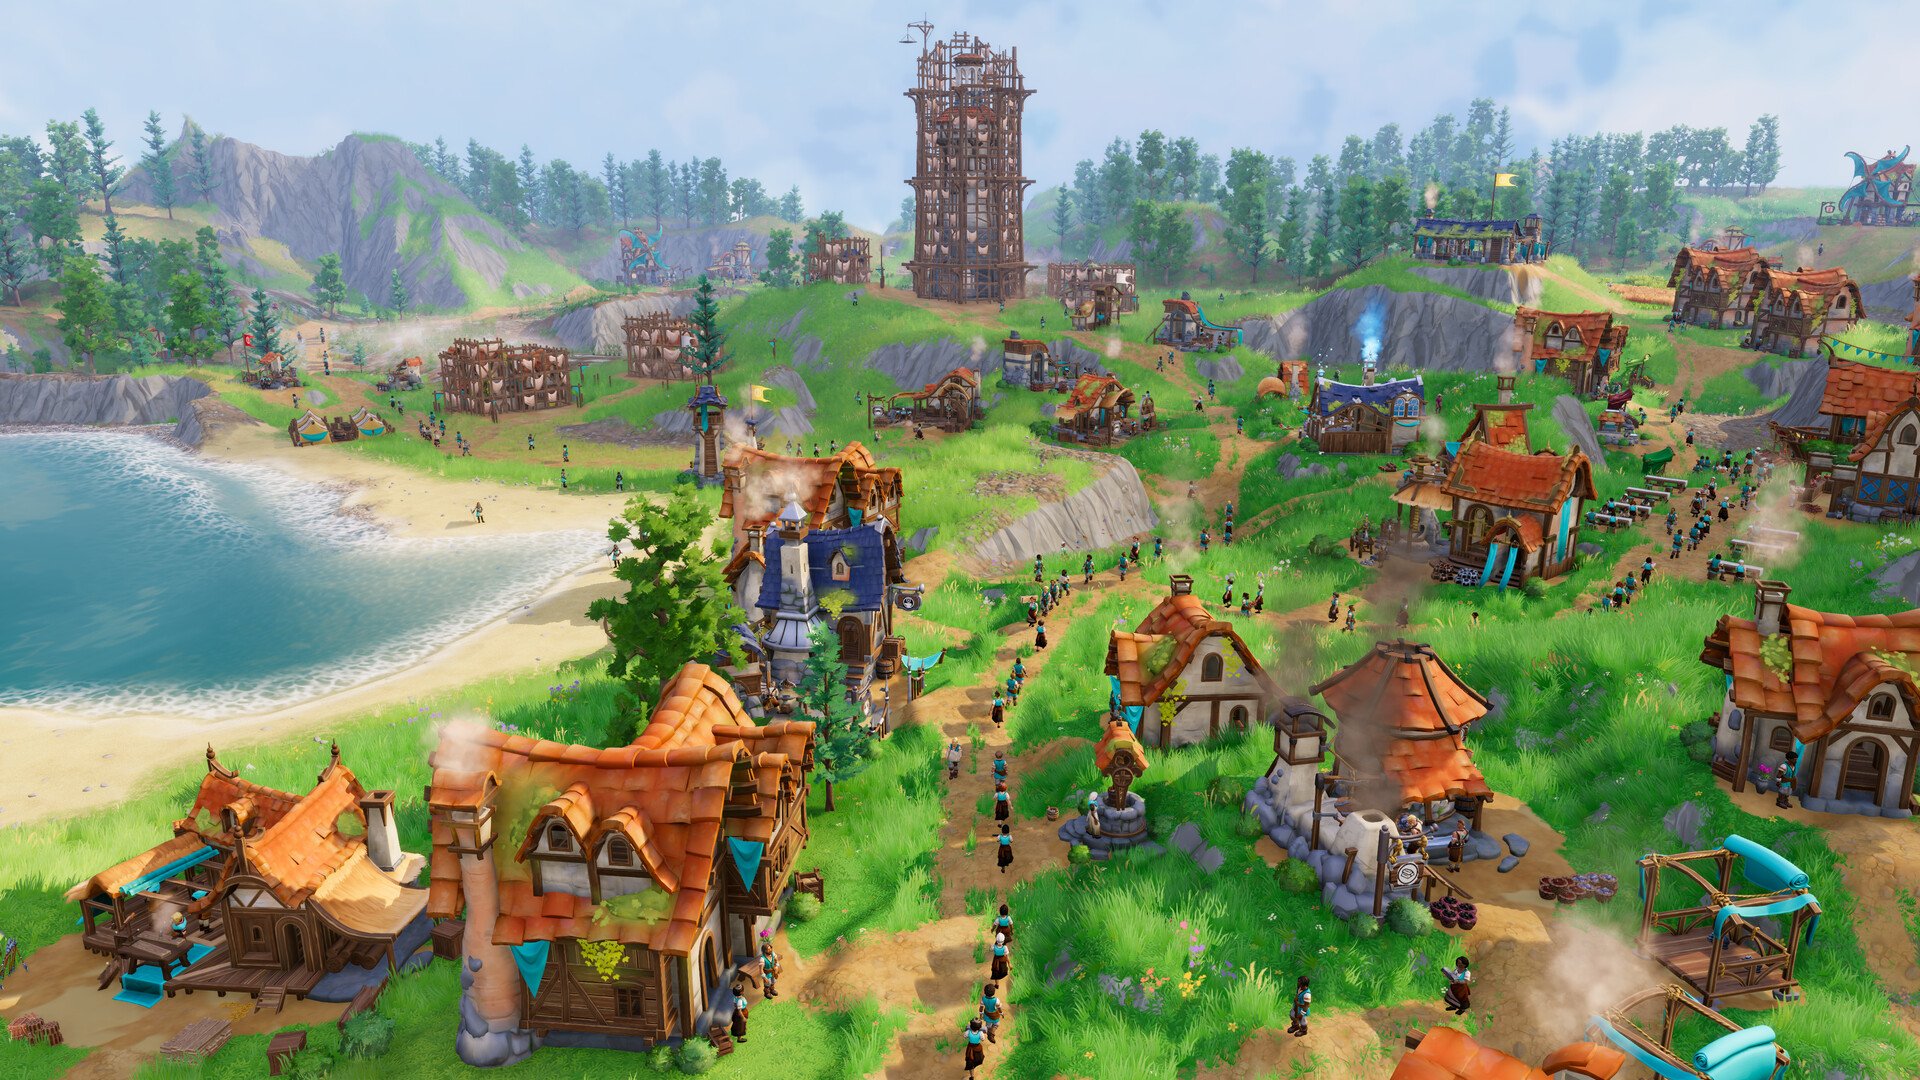 Pioneers of pagonia на русском. Pioneer игра. Pioneers of Pagonia PC. Pioneer PVP game. Scattered Tribes.